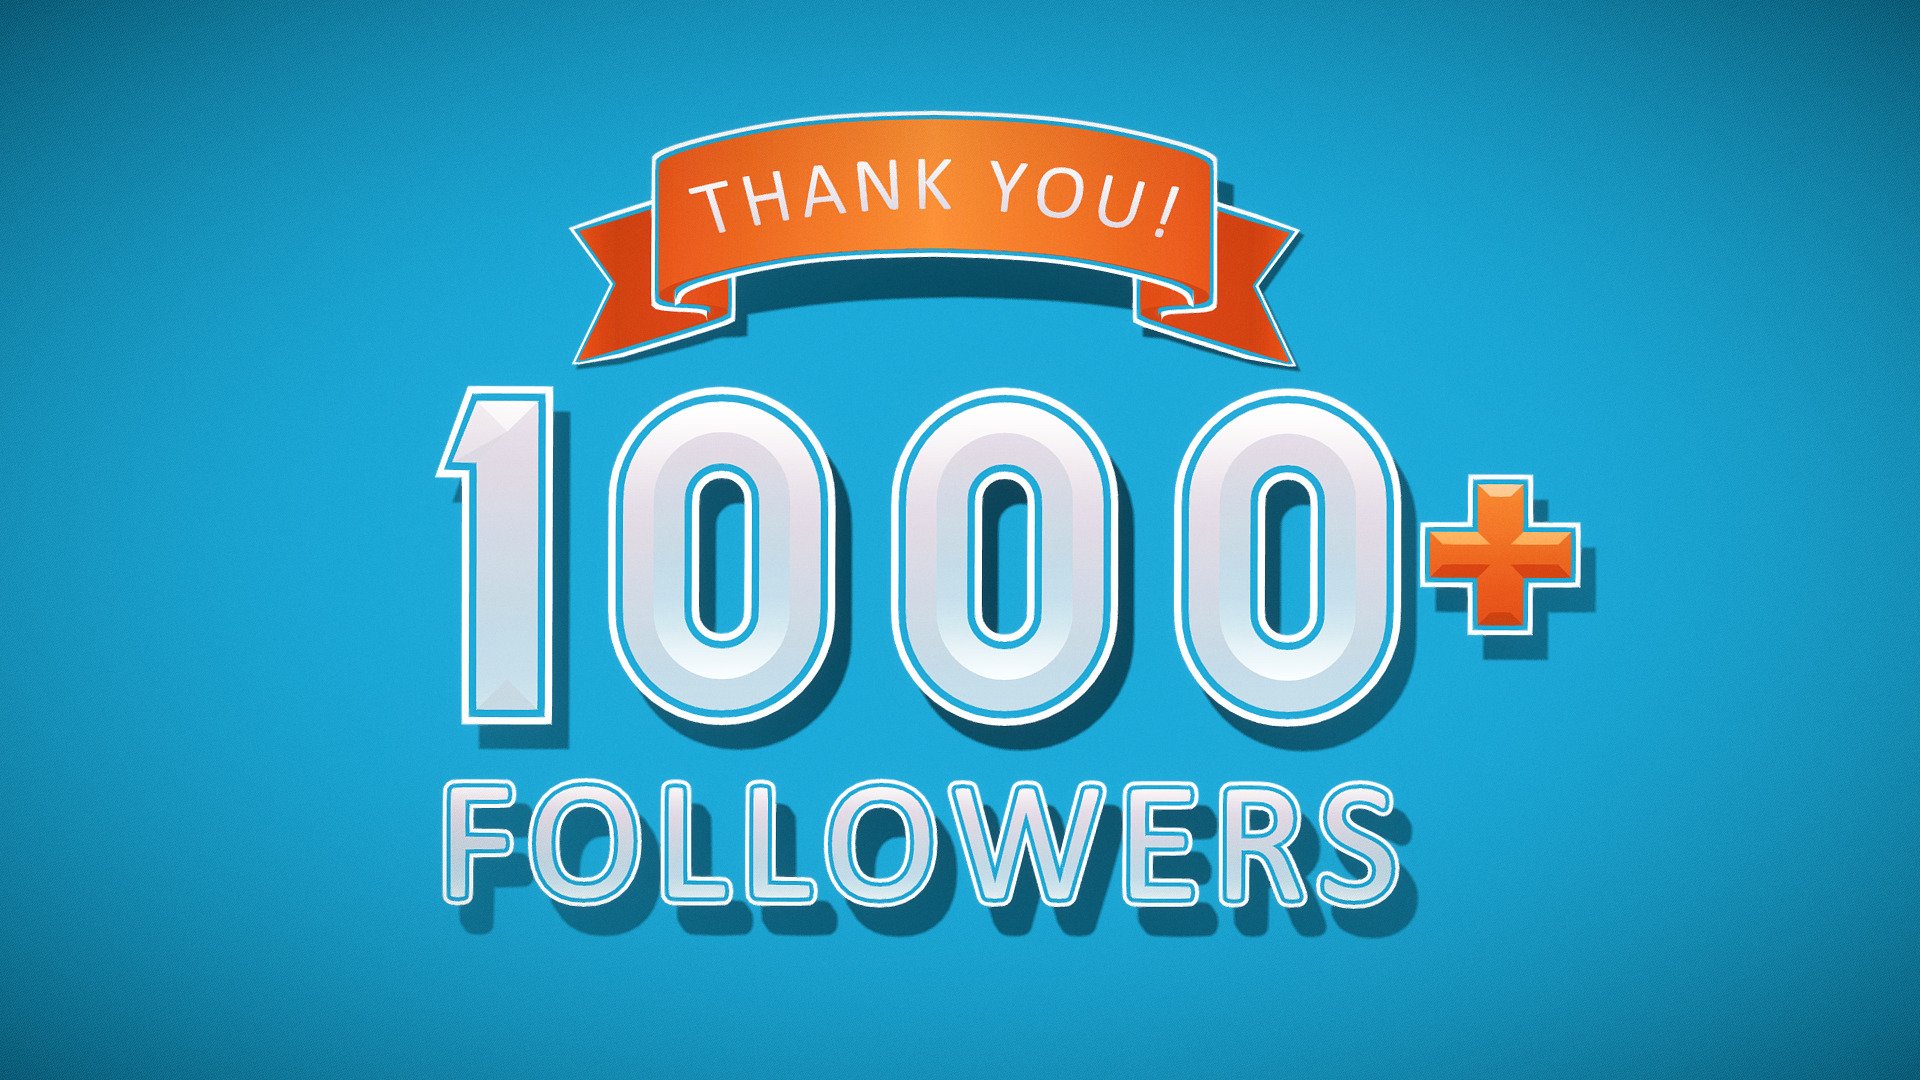 Thank you for 1.000+ Followers!